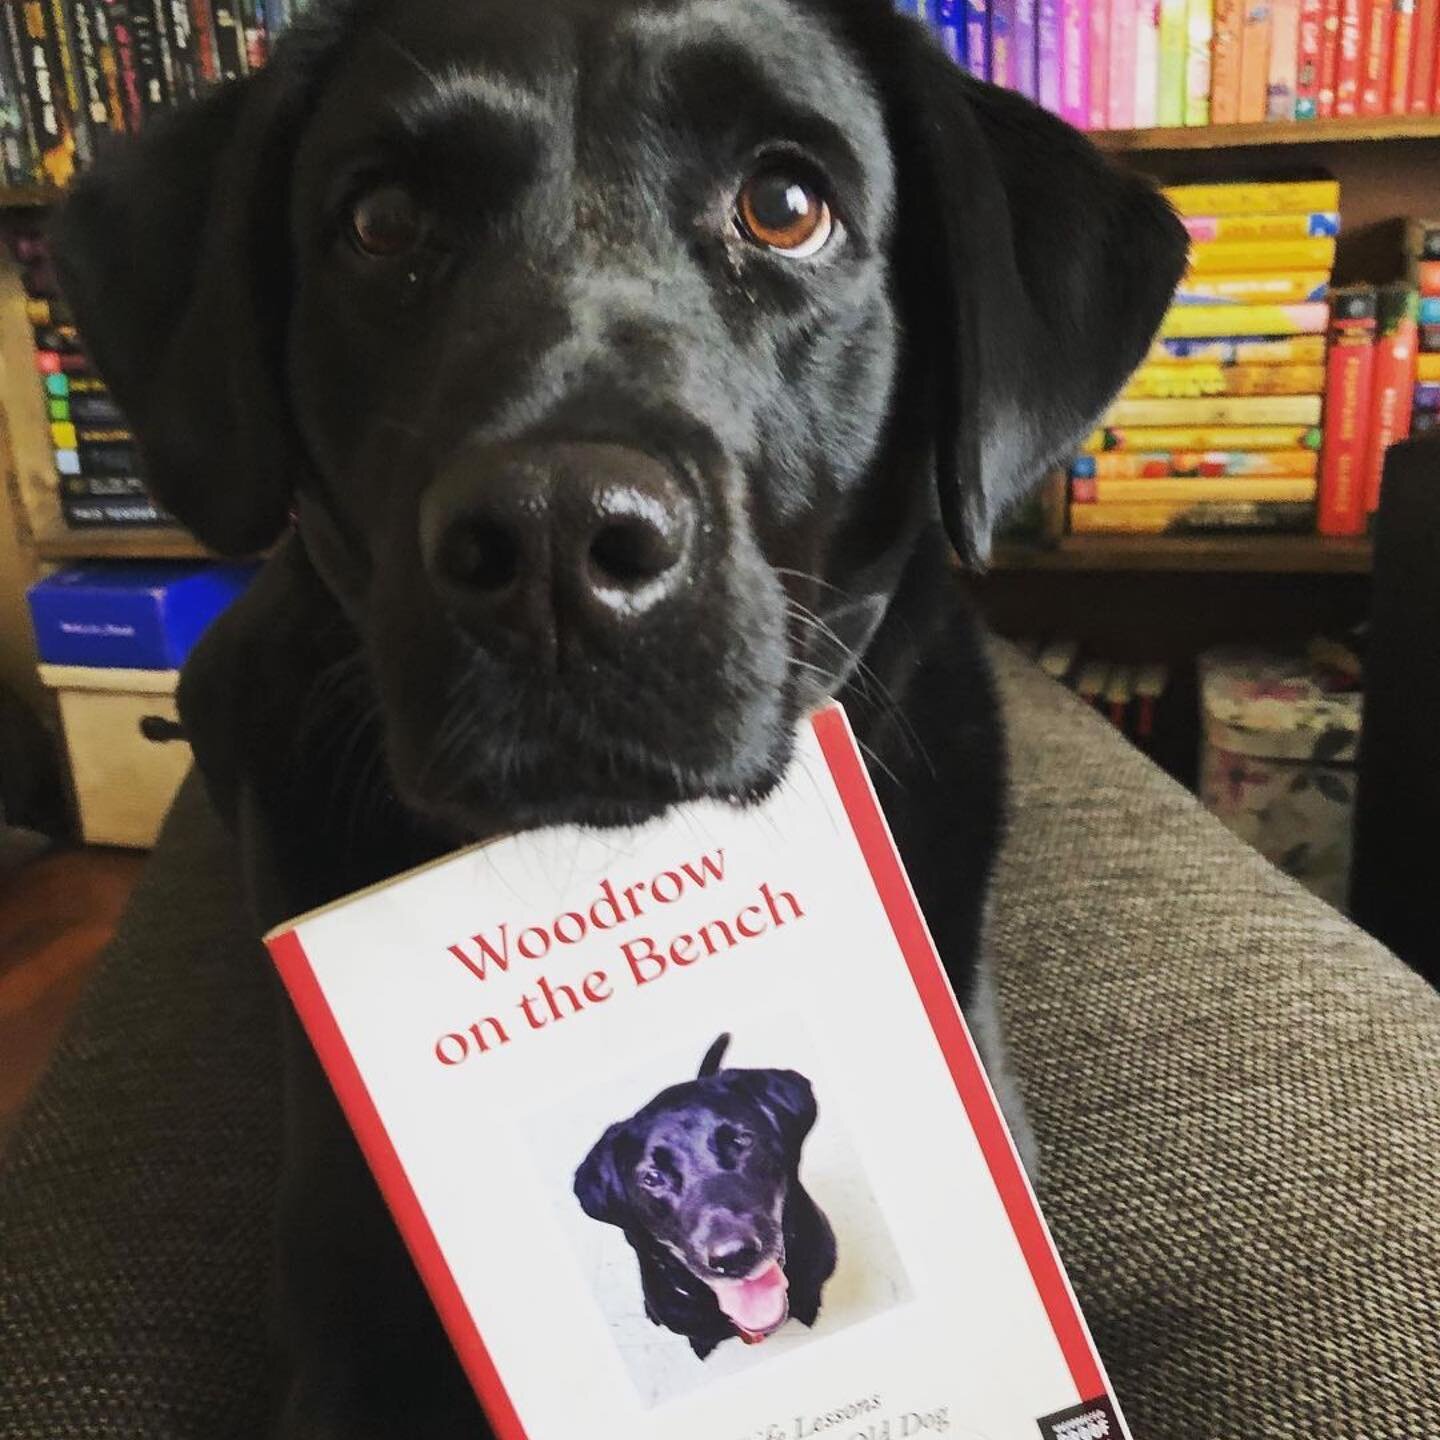 Hello The PATCHI, you are very beautiful. 😍🦴🐾📚❤️ #Repost @patchi_baby_lab with @make_repost
・・・
I found a friend among mom&rsquo;s book stack! Woodrow on the Bench by Jenna Blum will come out on the shelves on October 2021 for every fur soul or p